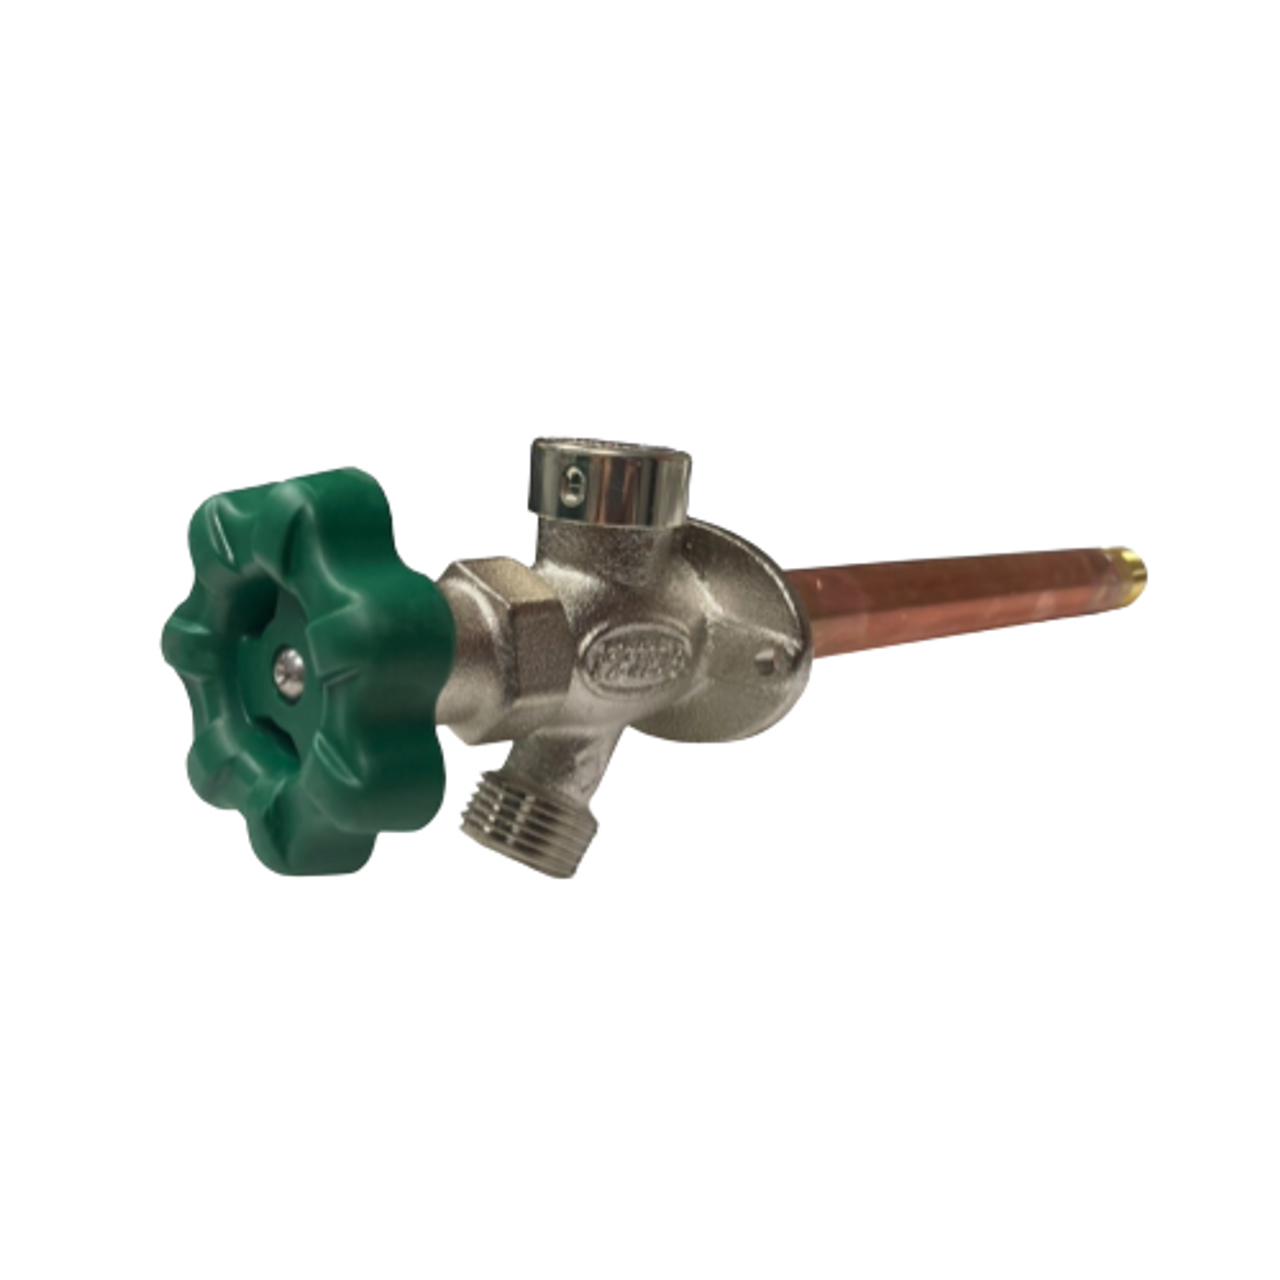 Prier P-164D12 1/2" MPT x 1/2" Sweat Handle-Operated Freeze less Wall hydrant 